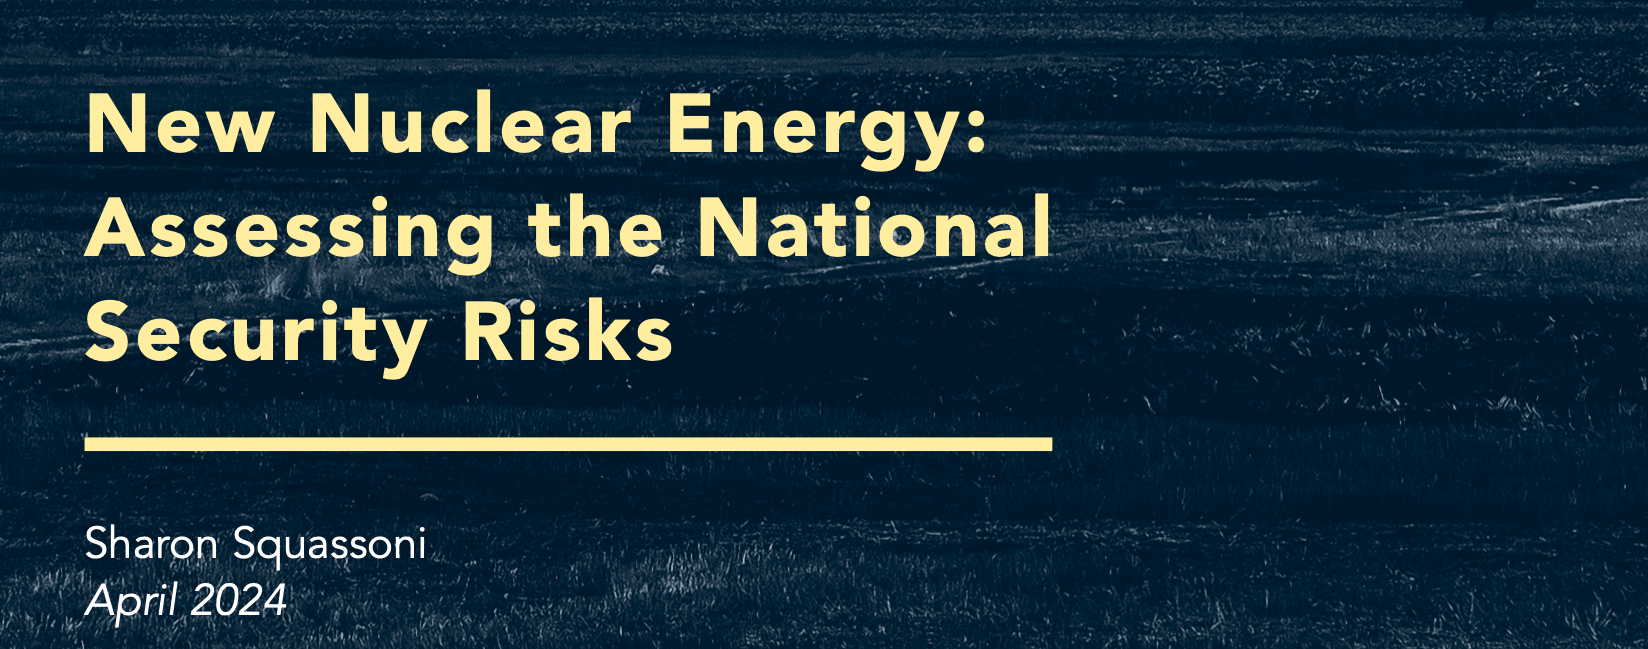 New Nuclear Energy: Assessing the National Security Risks | Sharon Squassoni | April 2024